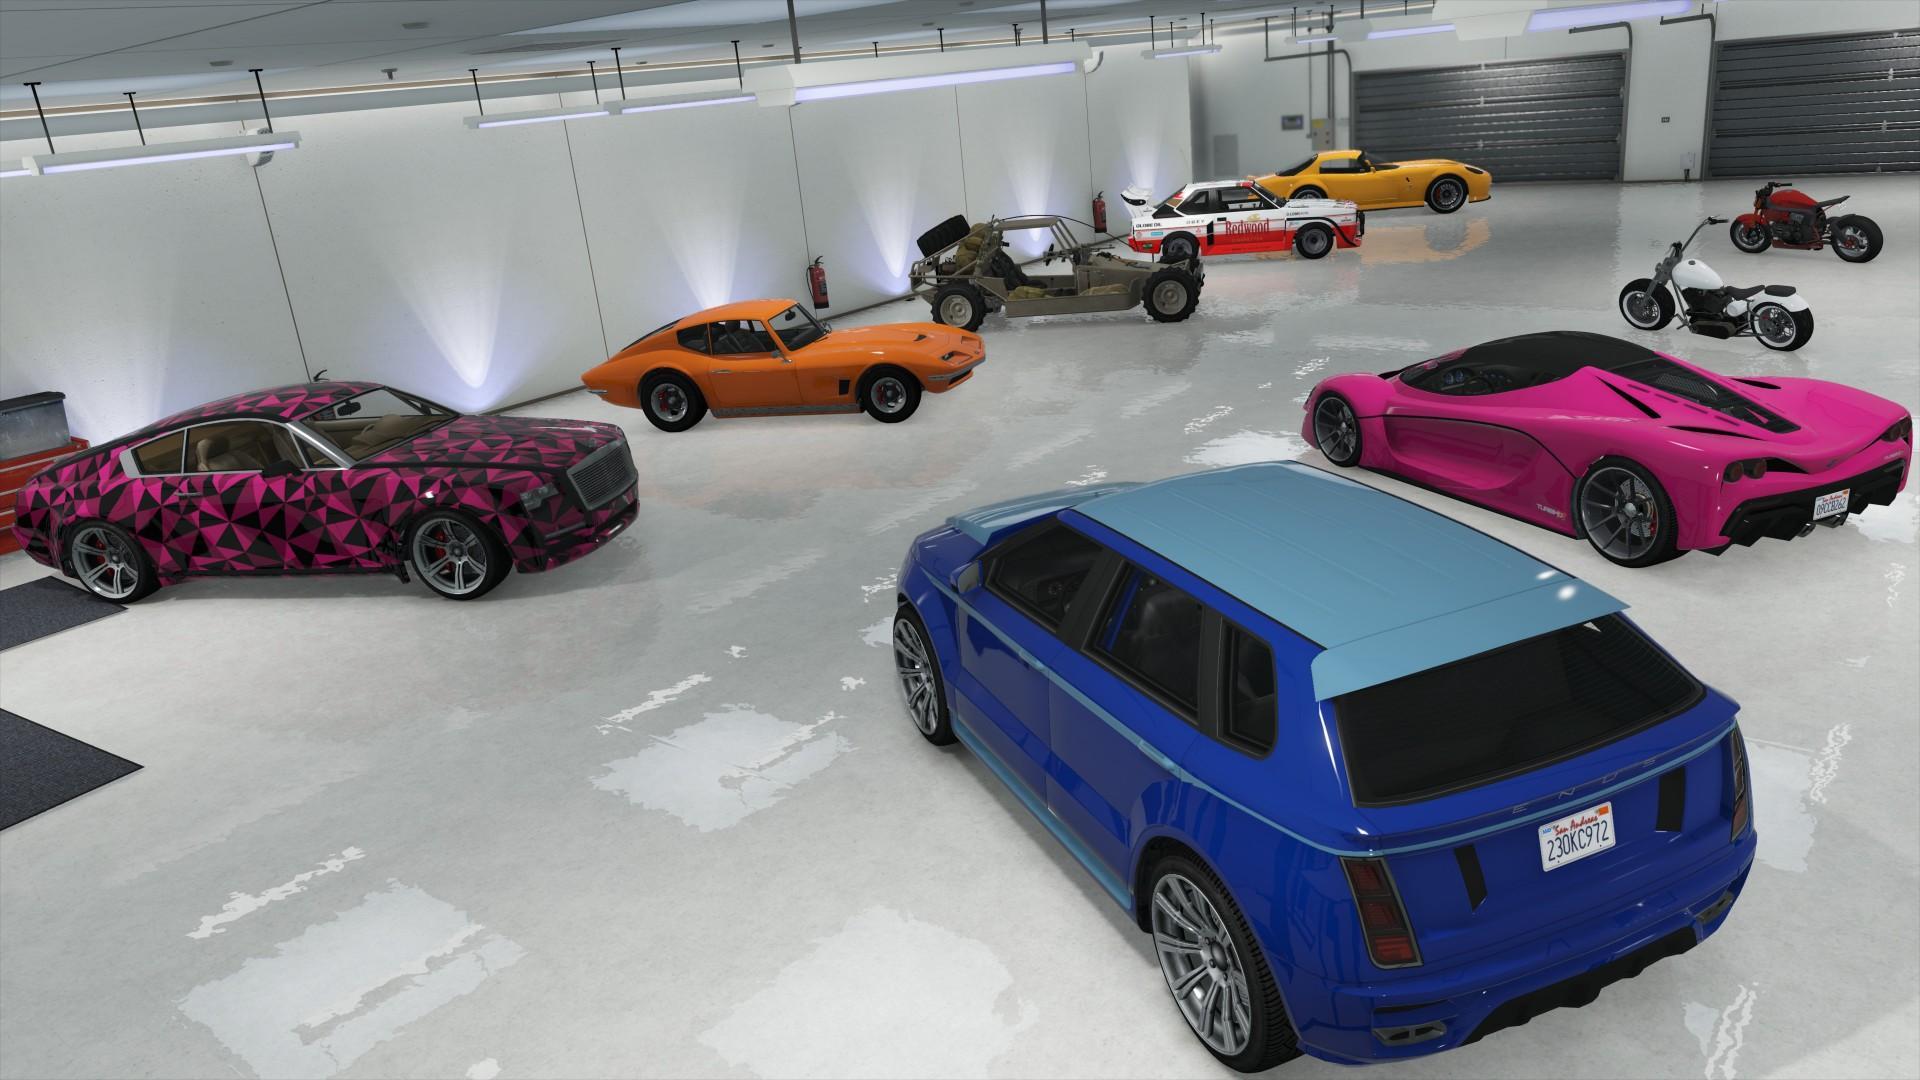 Garages Gta Online Property Types Guides Faqs Grand Theft Auto V